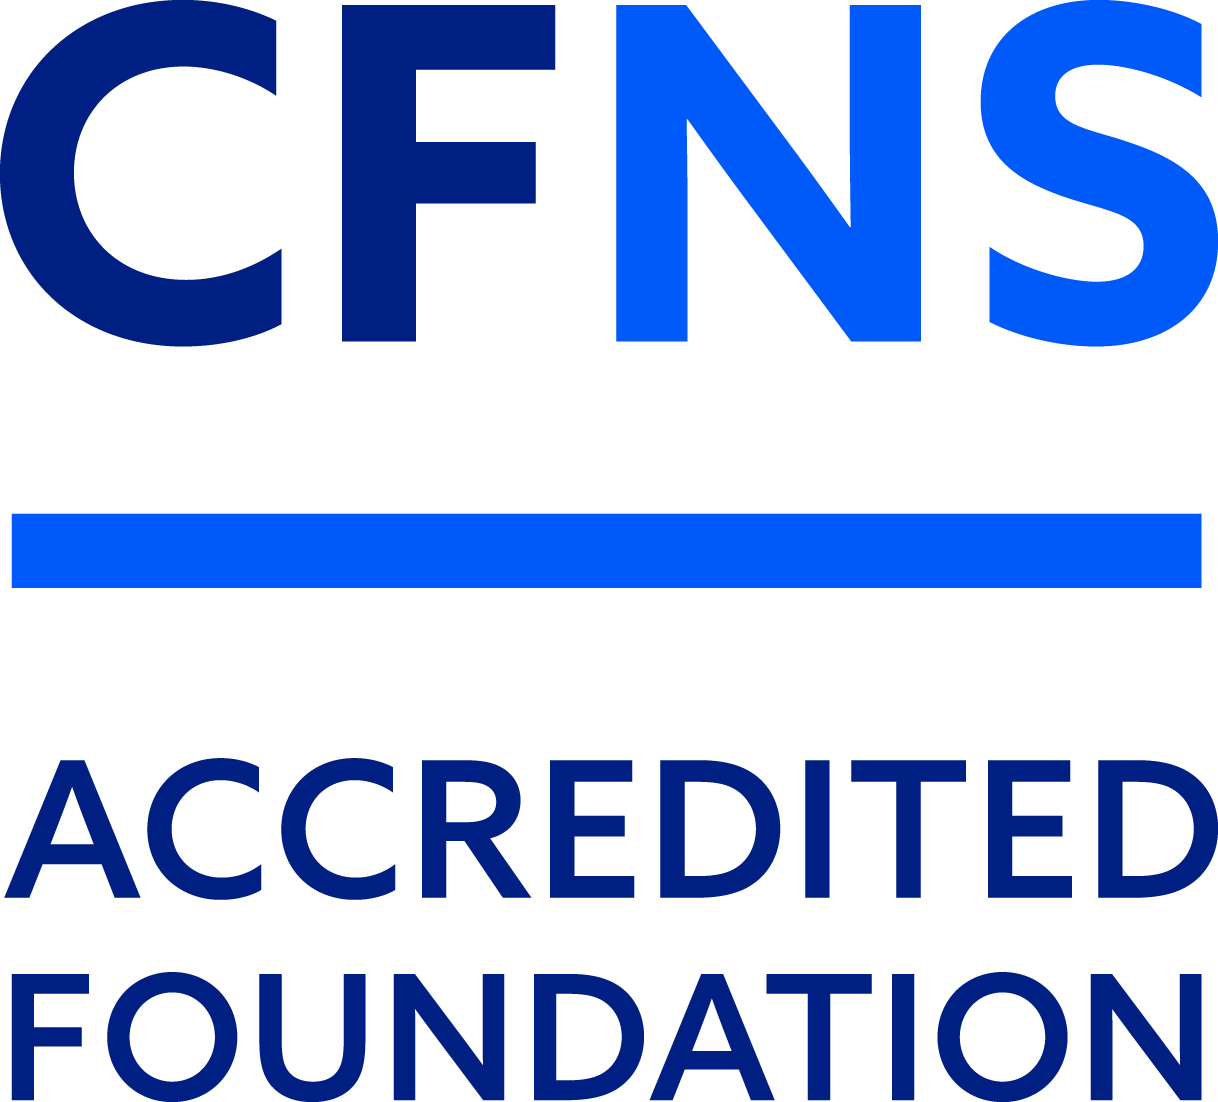 CFNS Accredited Foundation seal